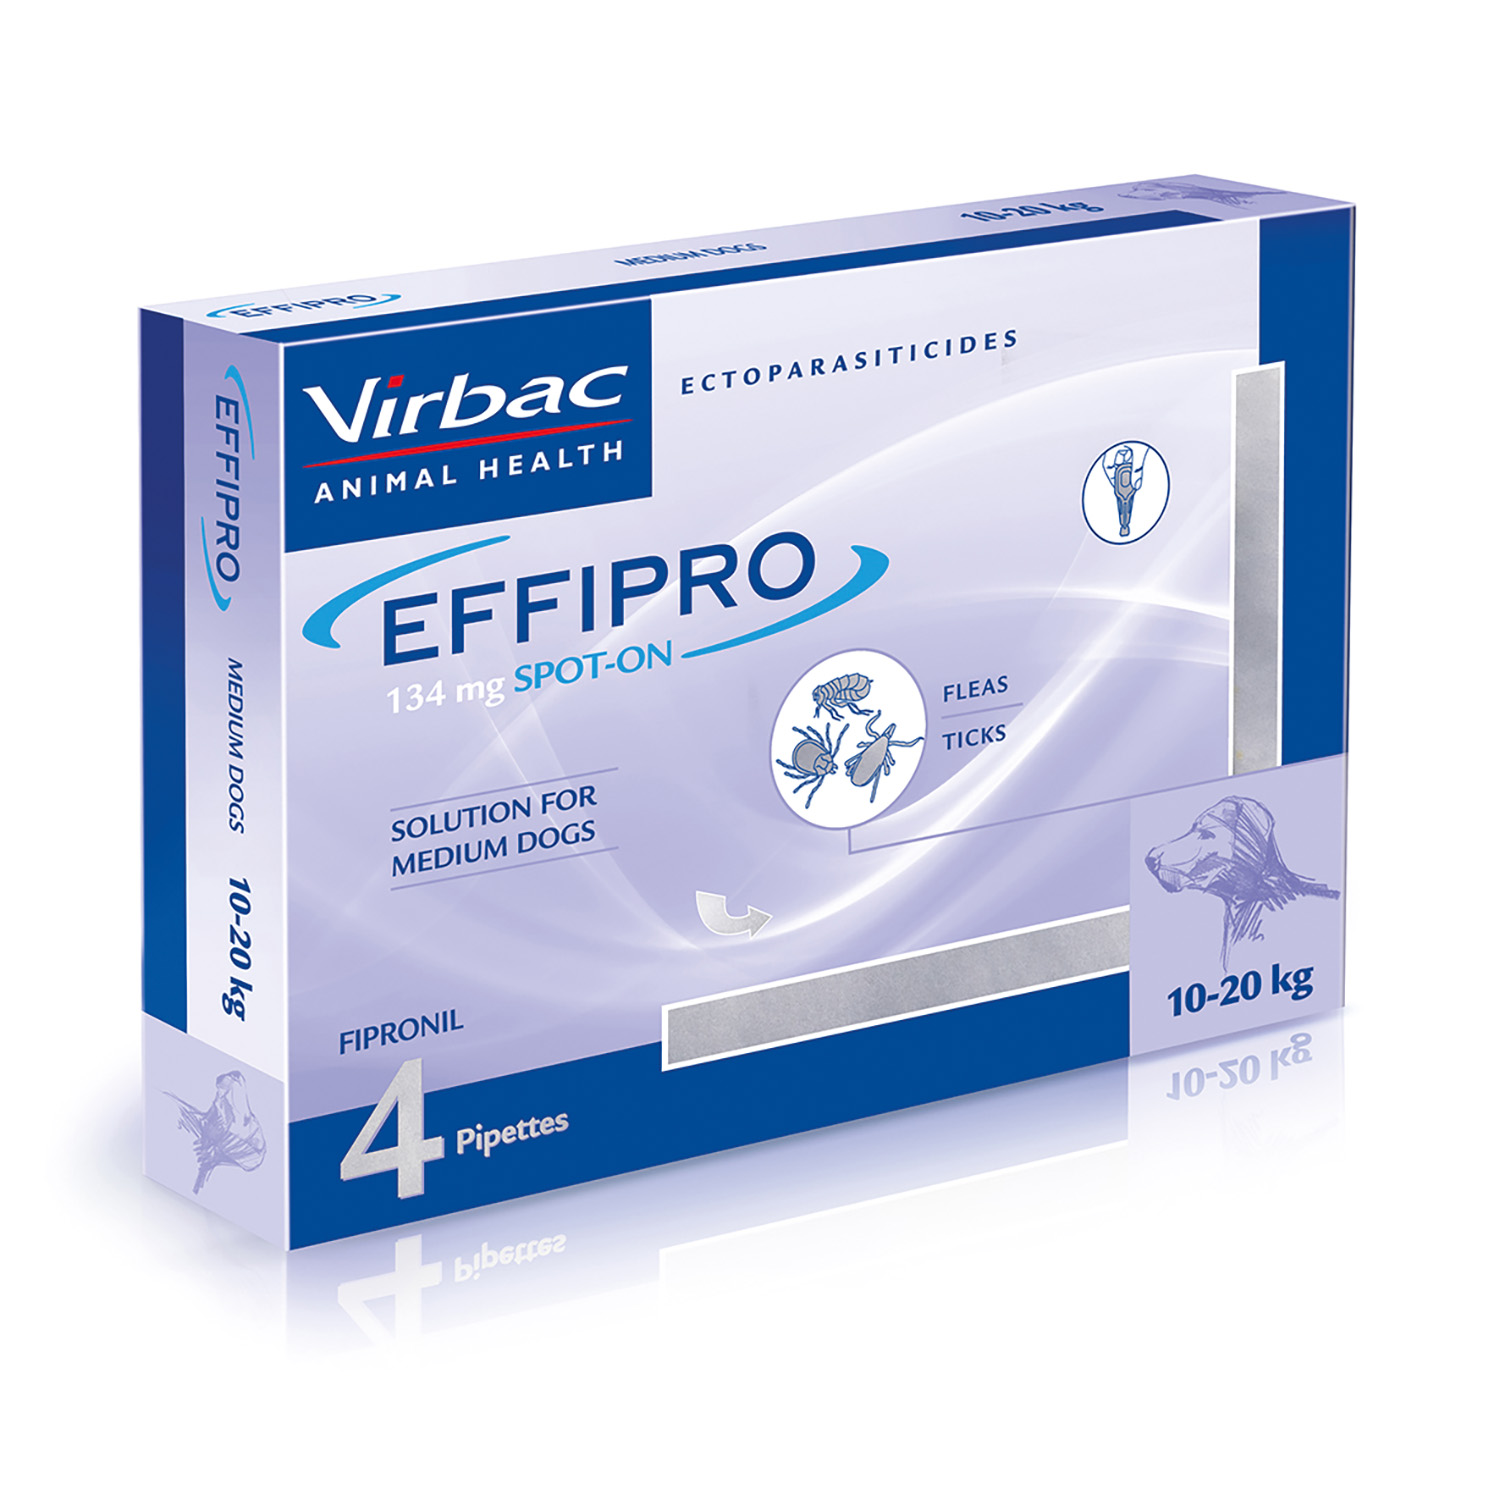 VIRBAC EFFIPRO SPOT ON FOR MEDIUM DOGS 4 PIPETTES 4 PIPETTES